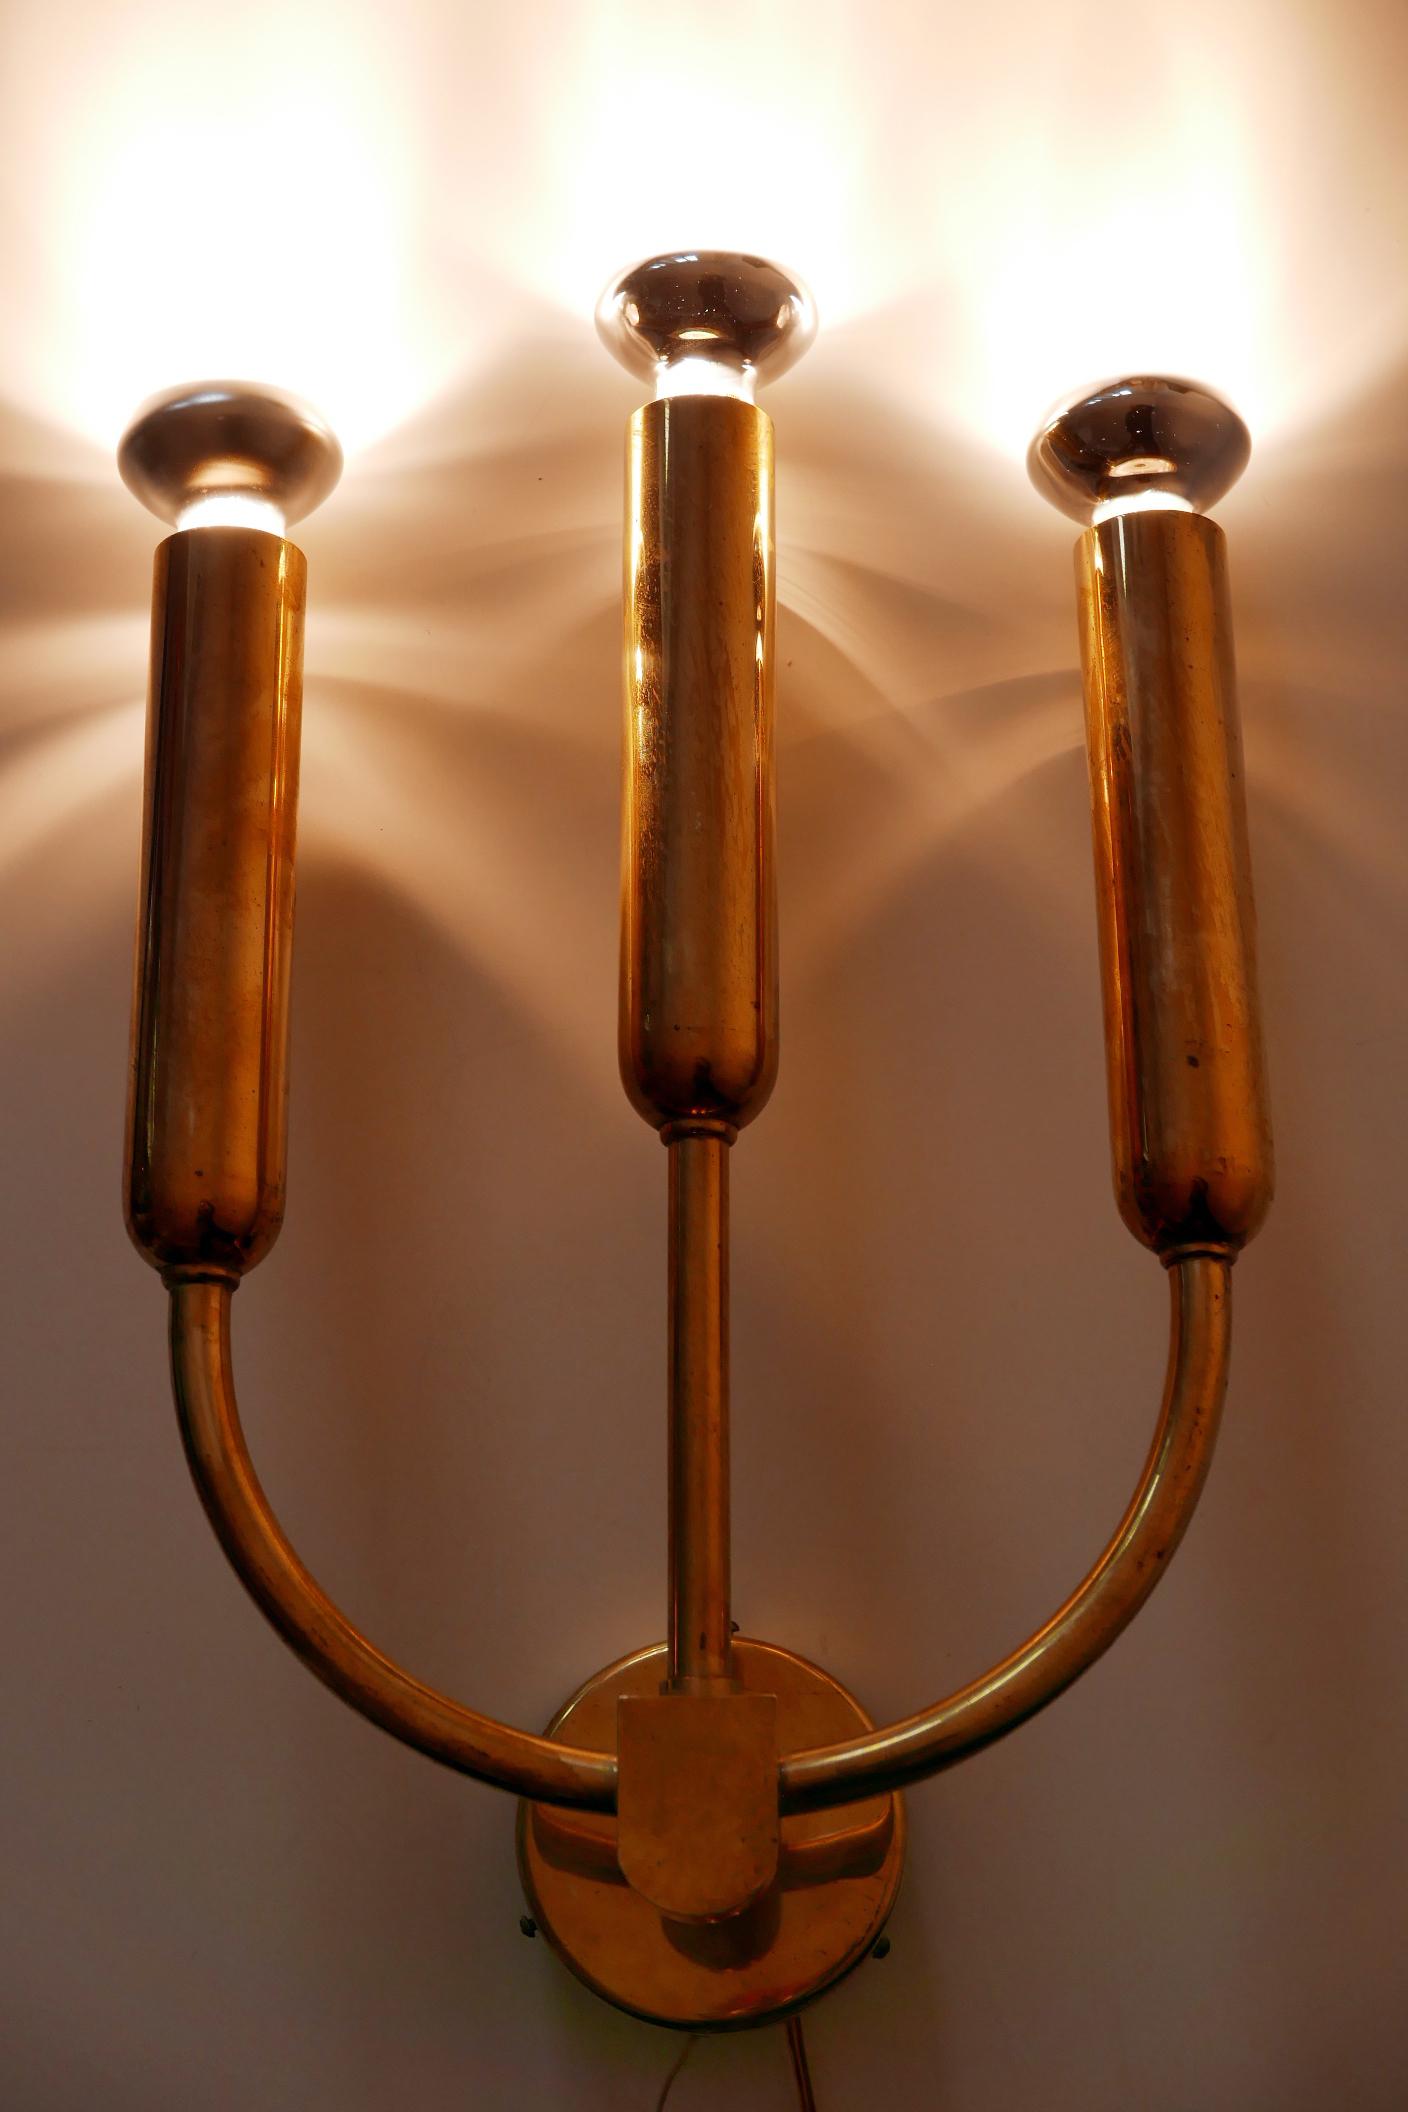 Exceptional, elegant and large Mid-Century Modern three-flamed brass wall lamp or sconce. Designed and manufactured probably in Germany, 1950s.

Executed in brass sheet and tubes, it needs 3 x E27 / E26 Edison screw fit bulbs. It is wired, in